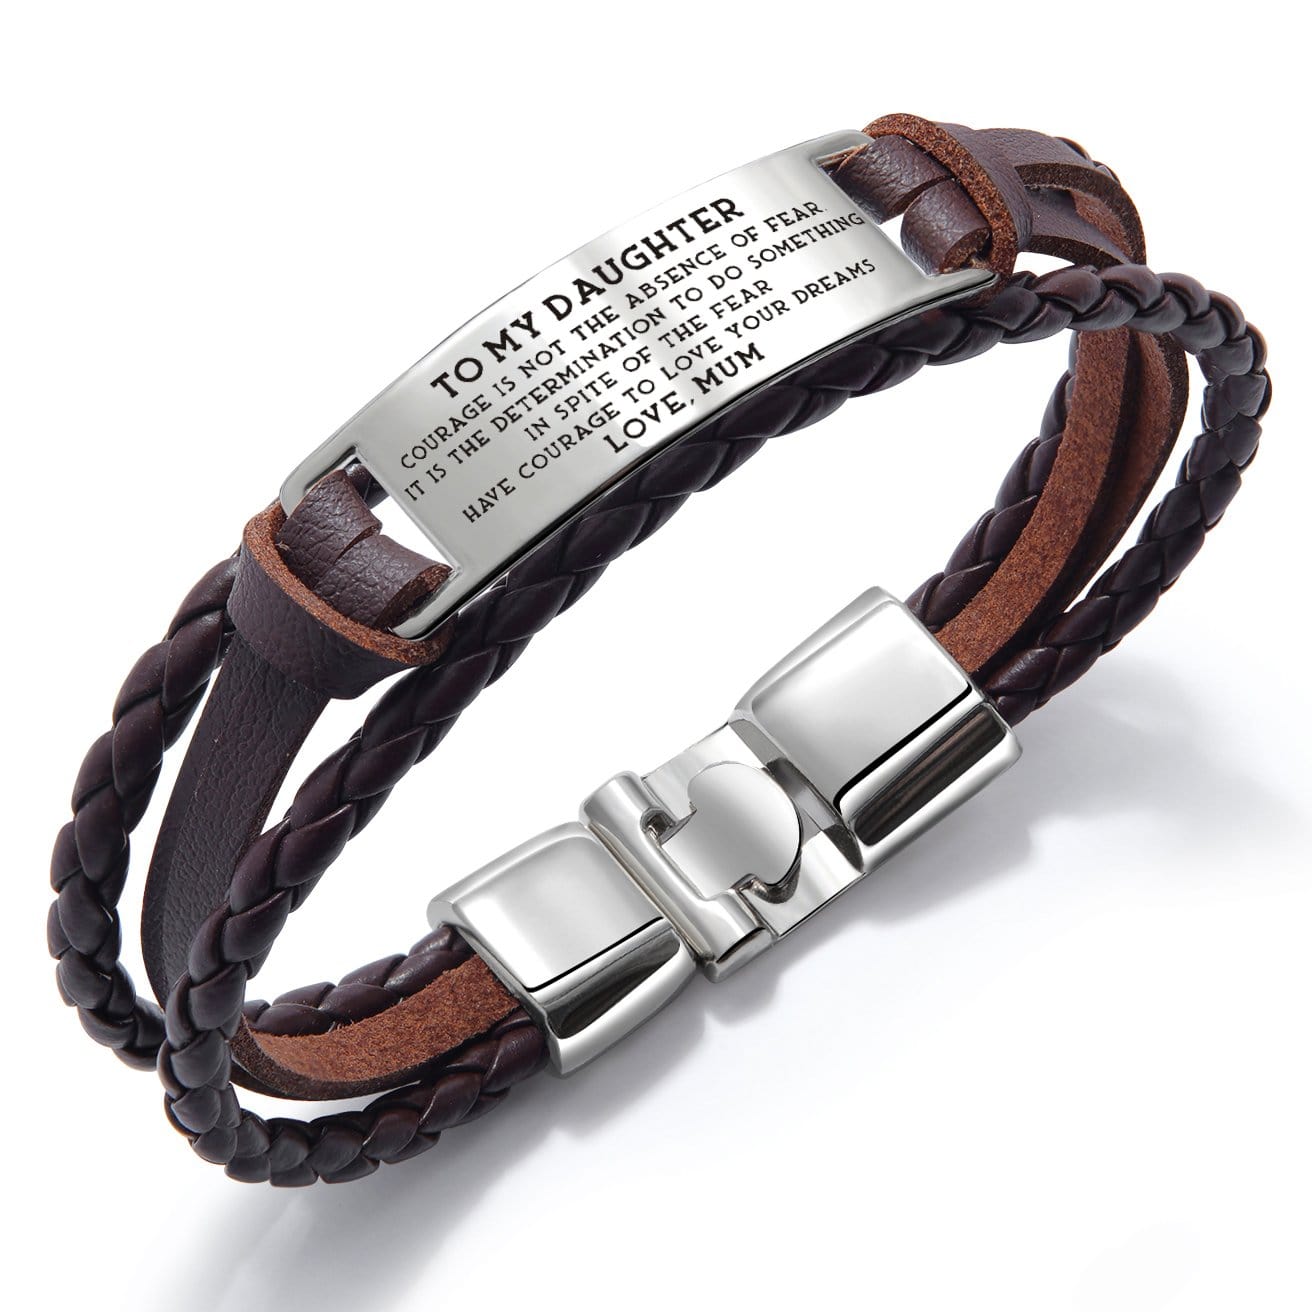 Bracelets Mum To Daughter - Have Courage To Love Your Dreams Leather Bracelet Brown GiveMe-Gifts